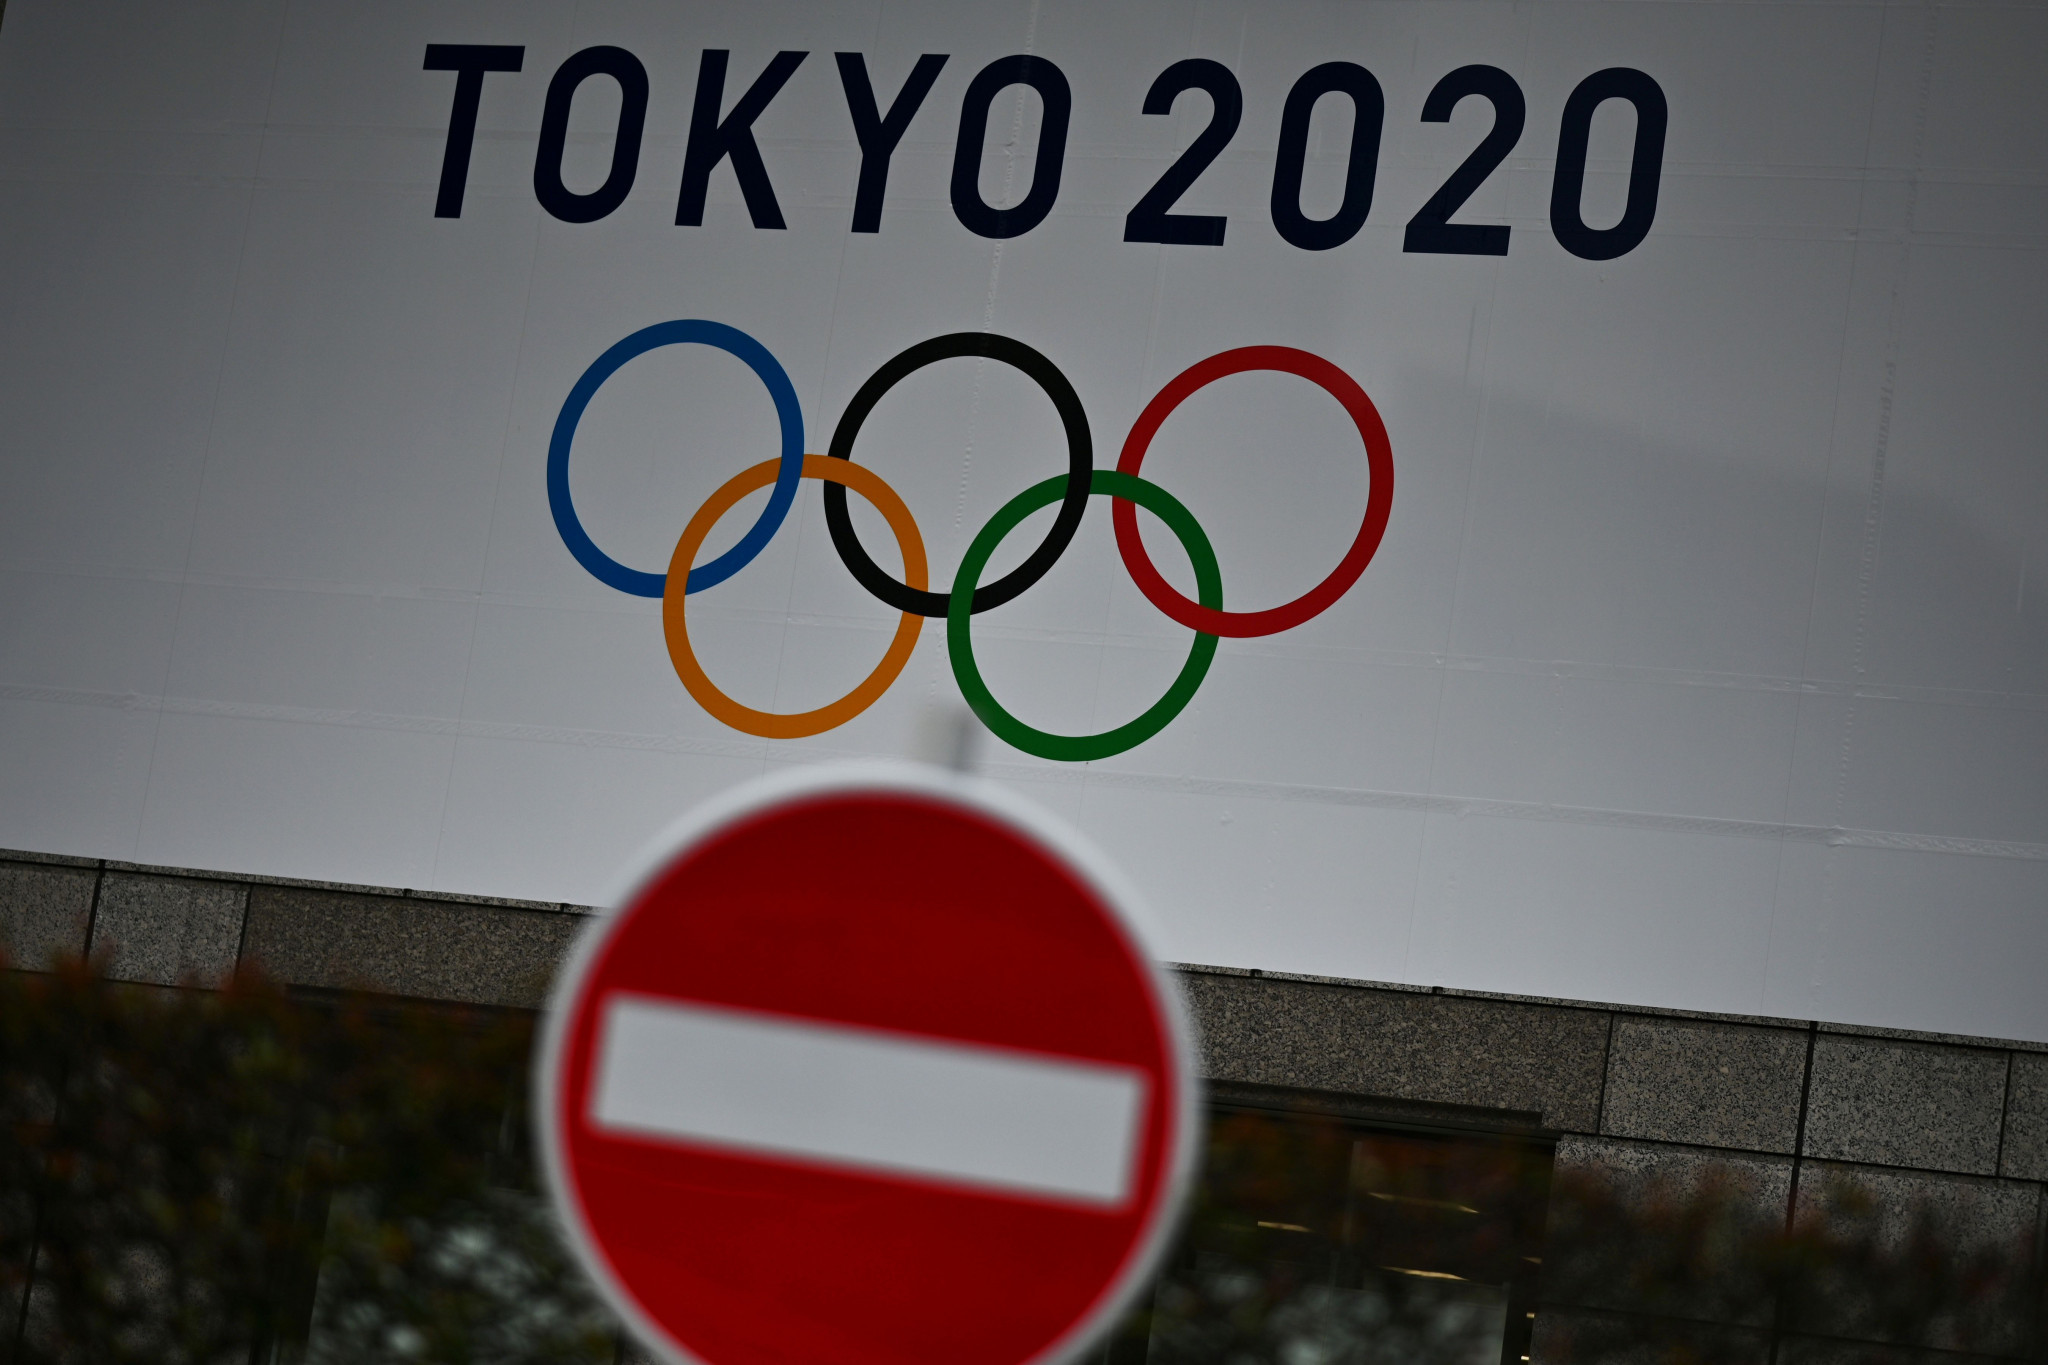 Canada have said they will not compete at the Olympic and Paralympic Games should they be held this year ©Getty Images